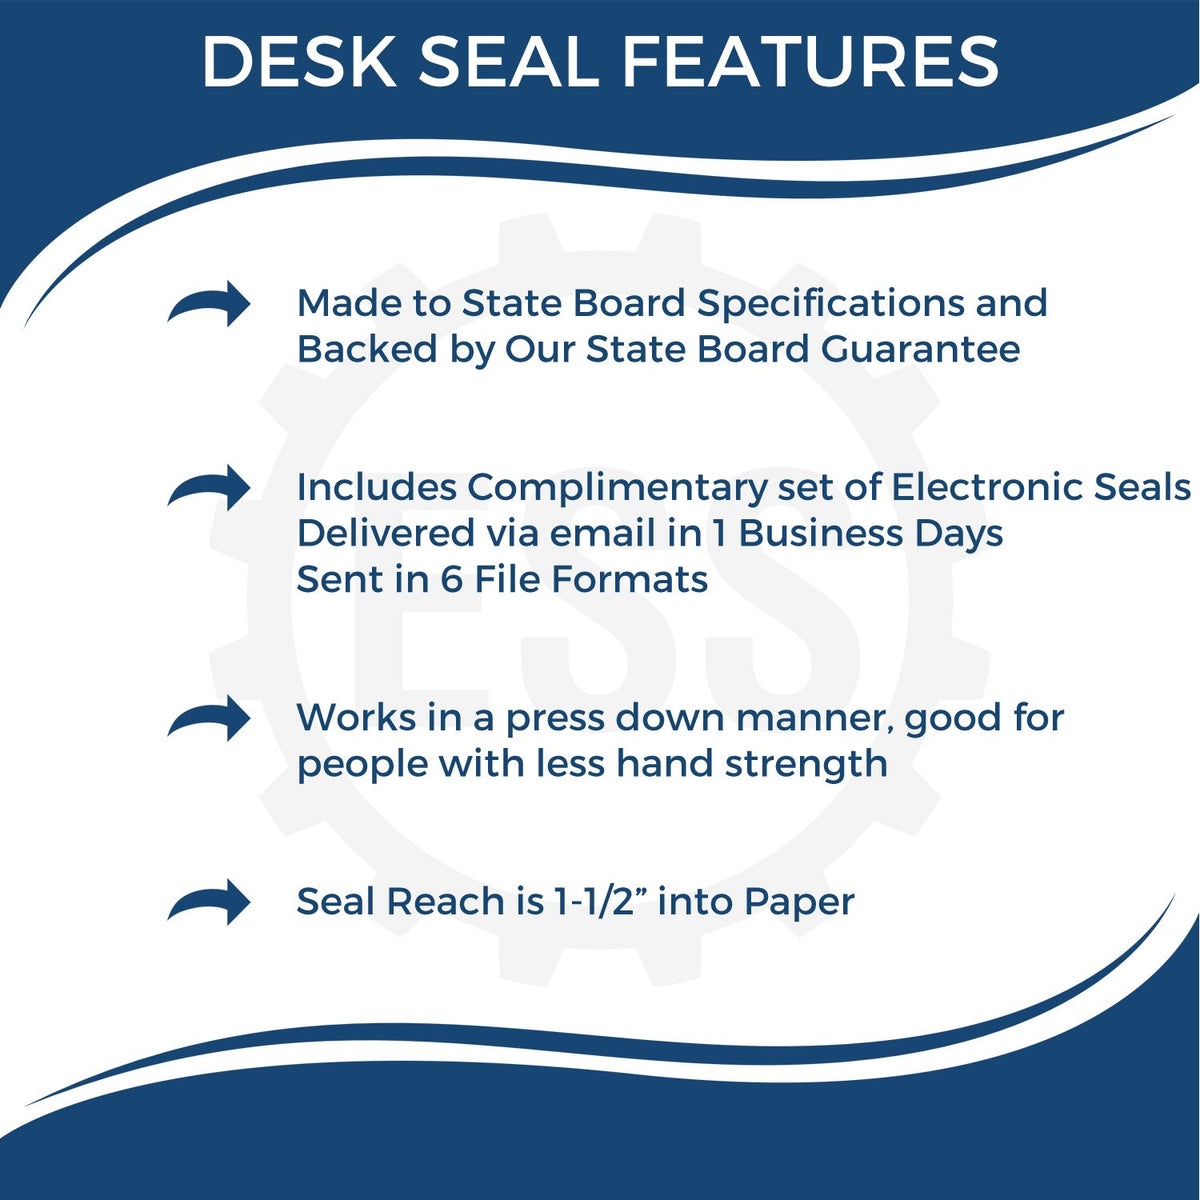 A picture of an infographic highlighting the selling points for the Delaware Desk Architect Embossing Seal